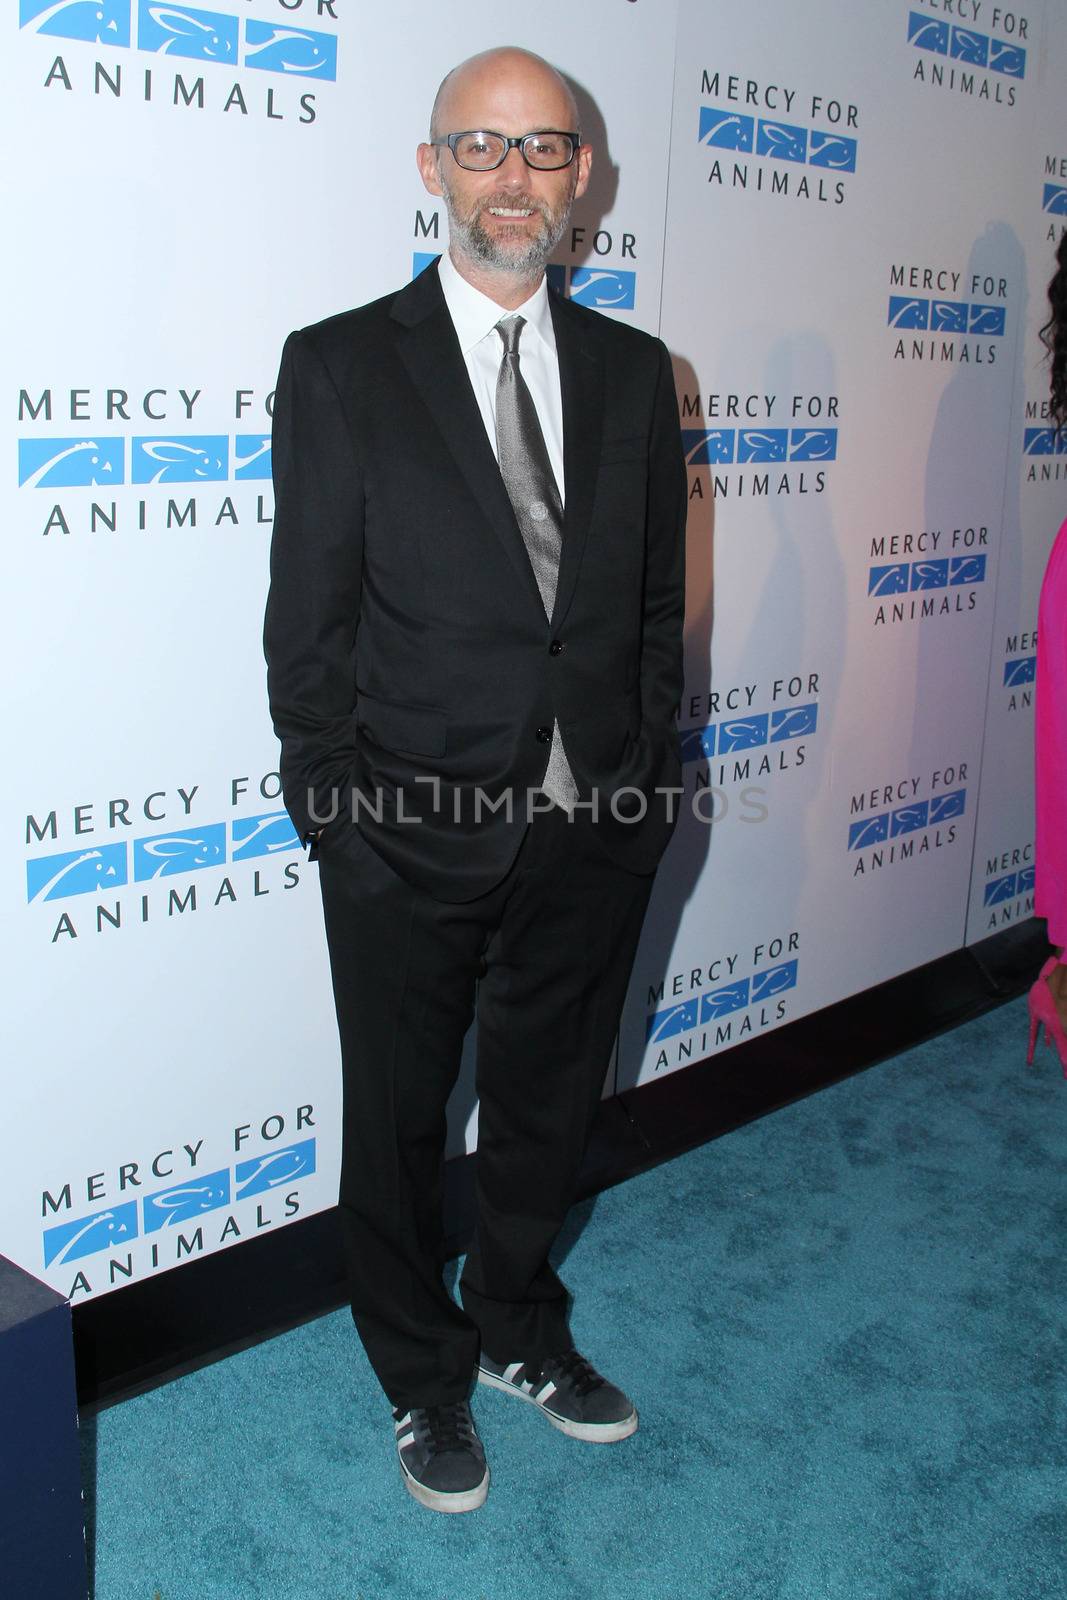 Moby
Mercy For Animals 15th Anniversary Gala, The London, West Hollywood, CA 09-12-14/ImageCollect by ImageCollect